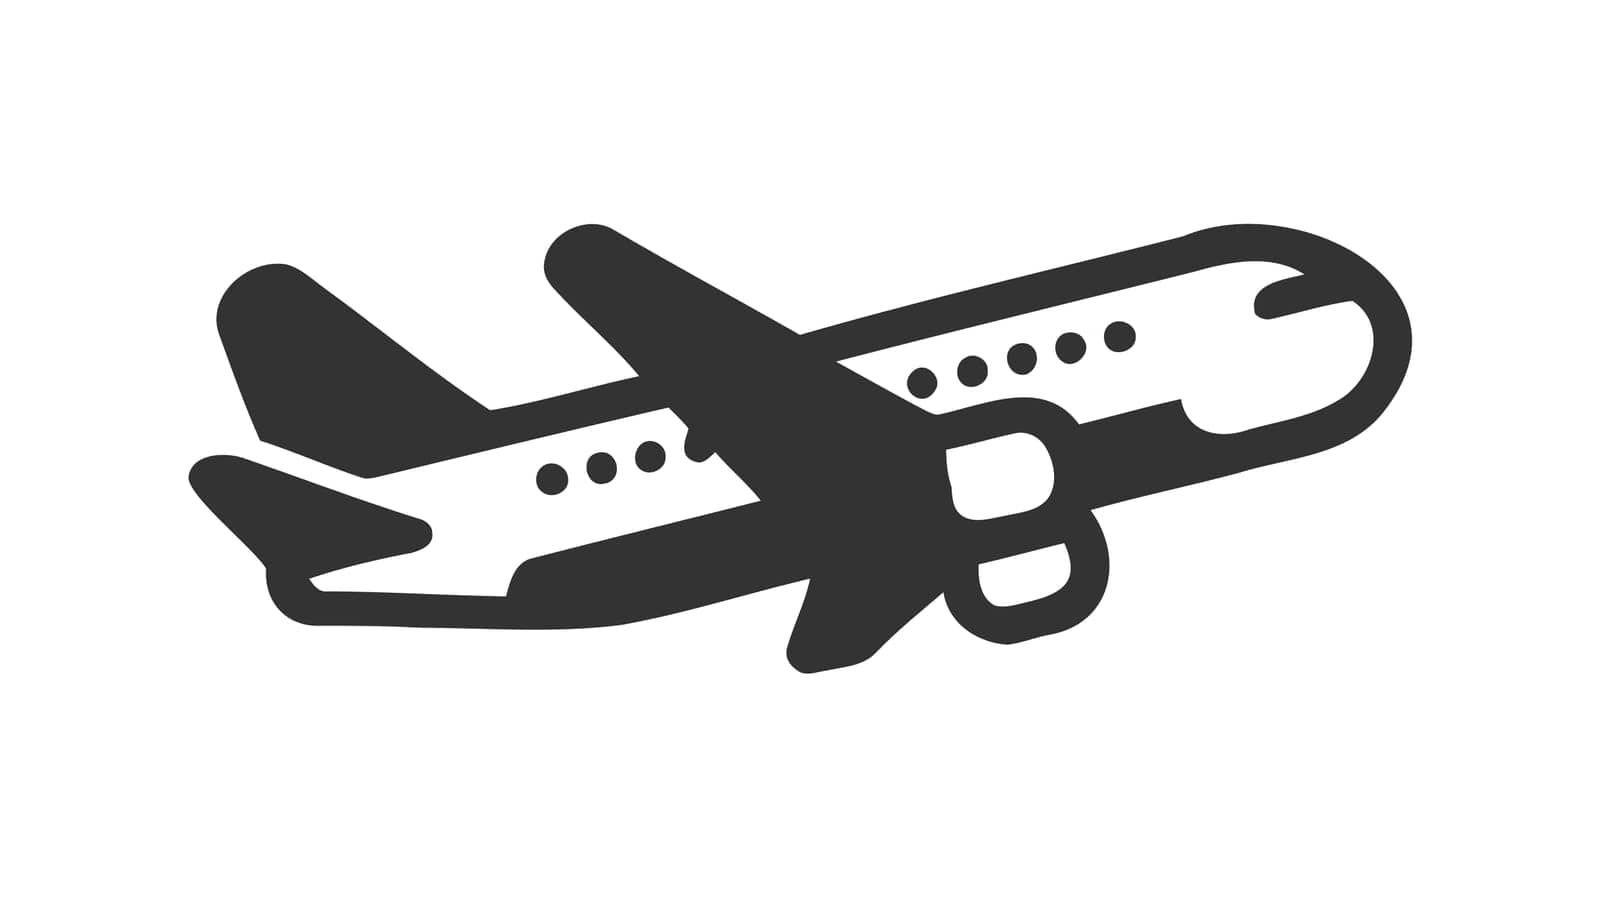 Plane icon vector, solid illustration, pictogram isolated on white by Artisttop